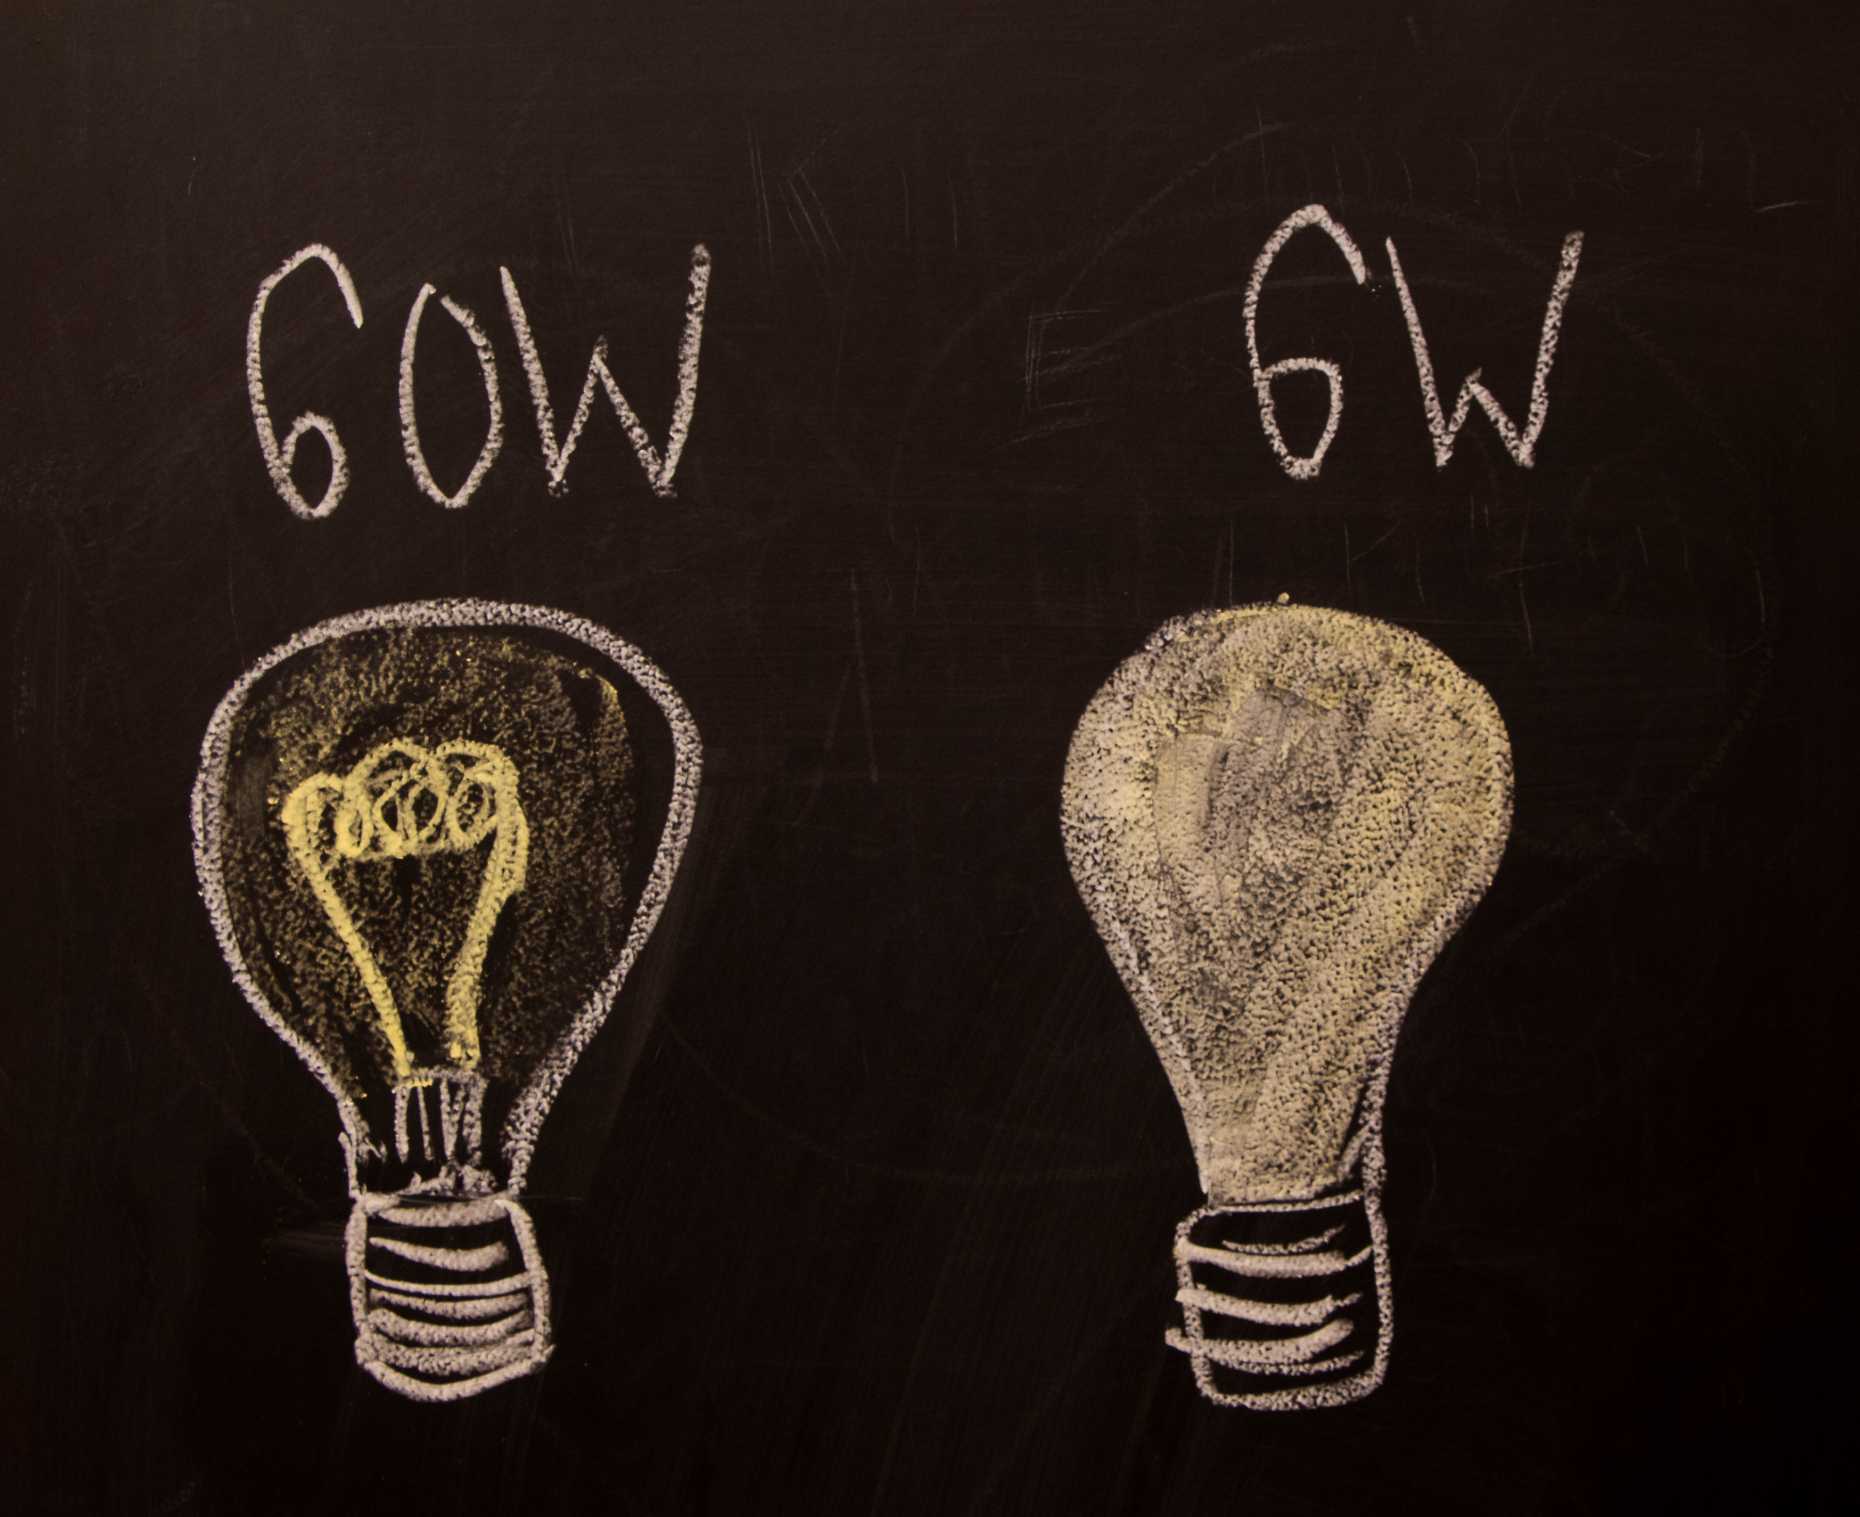 Enlarged view: What is the difference between using a cnventional lightbulb with 60 Watt or an energy efficient one with  6 Watt?